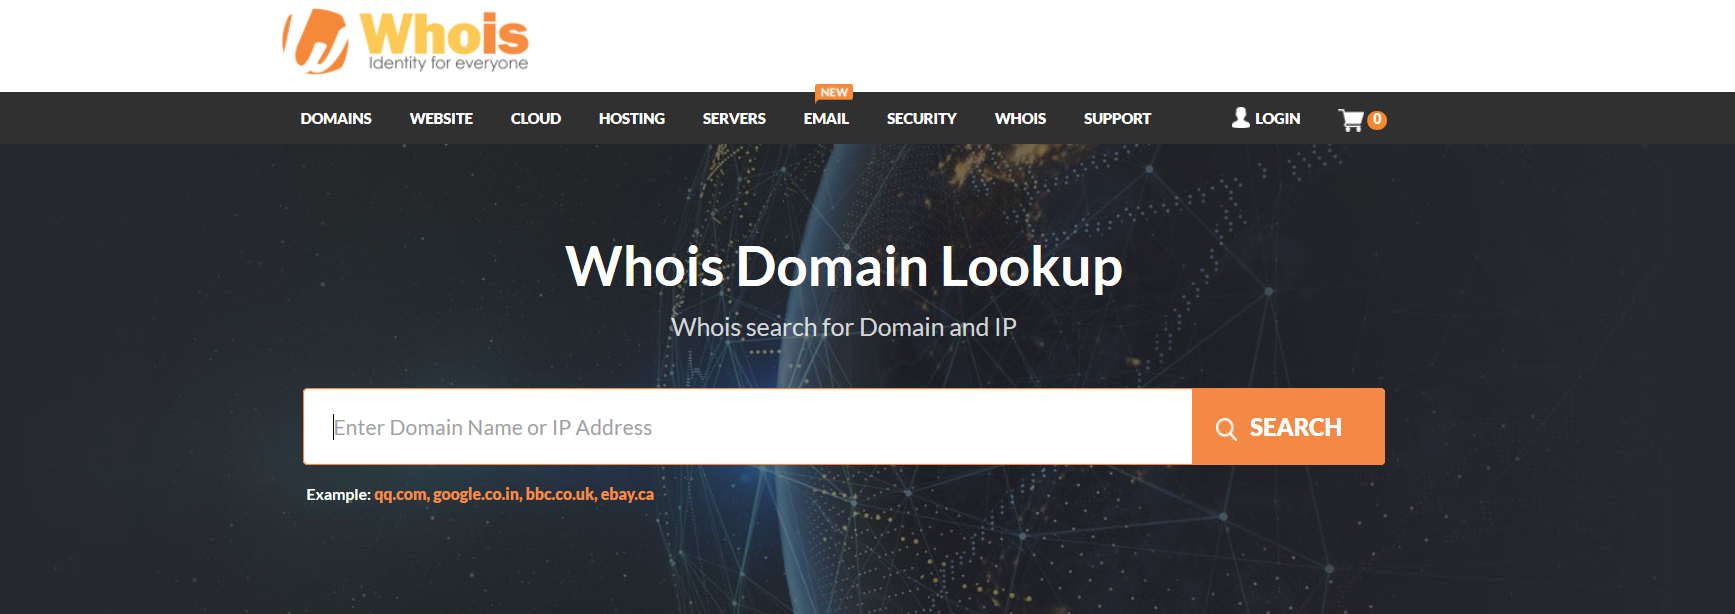 Check Whois Lookup to avoid scam on Shopify stores